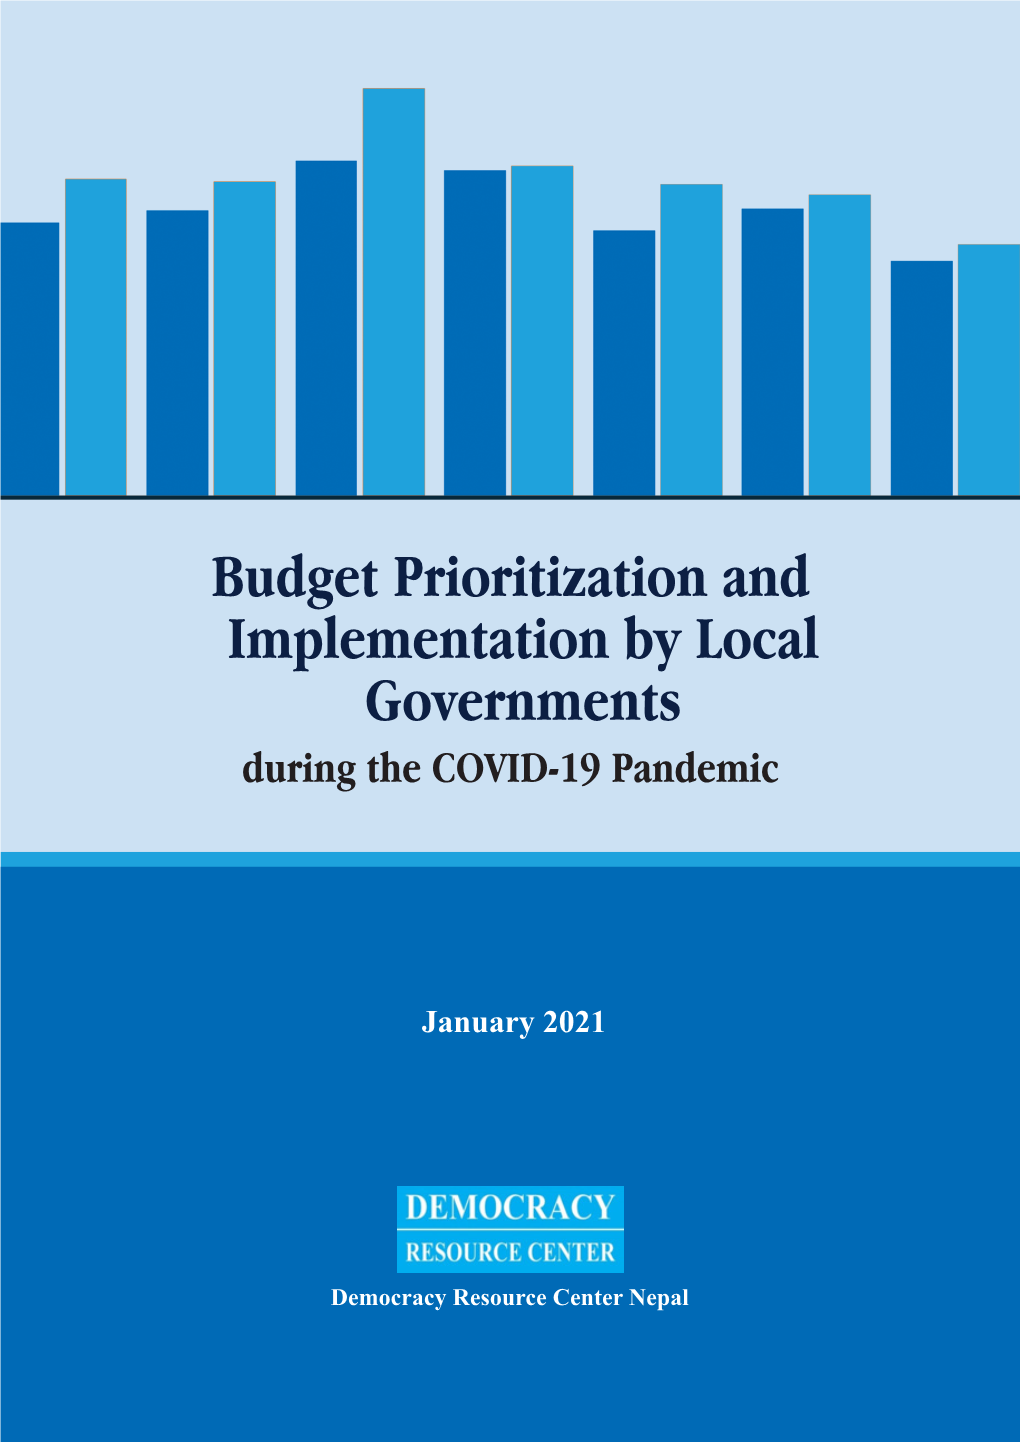 Budget Prioritization and Implementation by Local Governments During the COVID-19 Pandemic